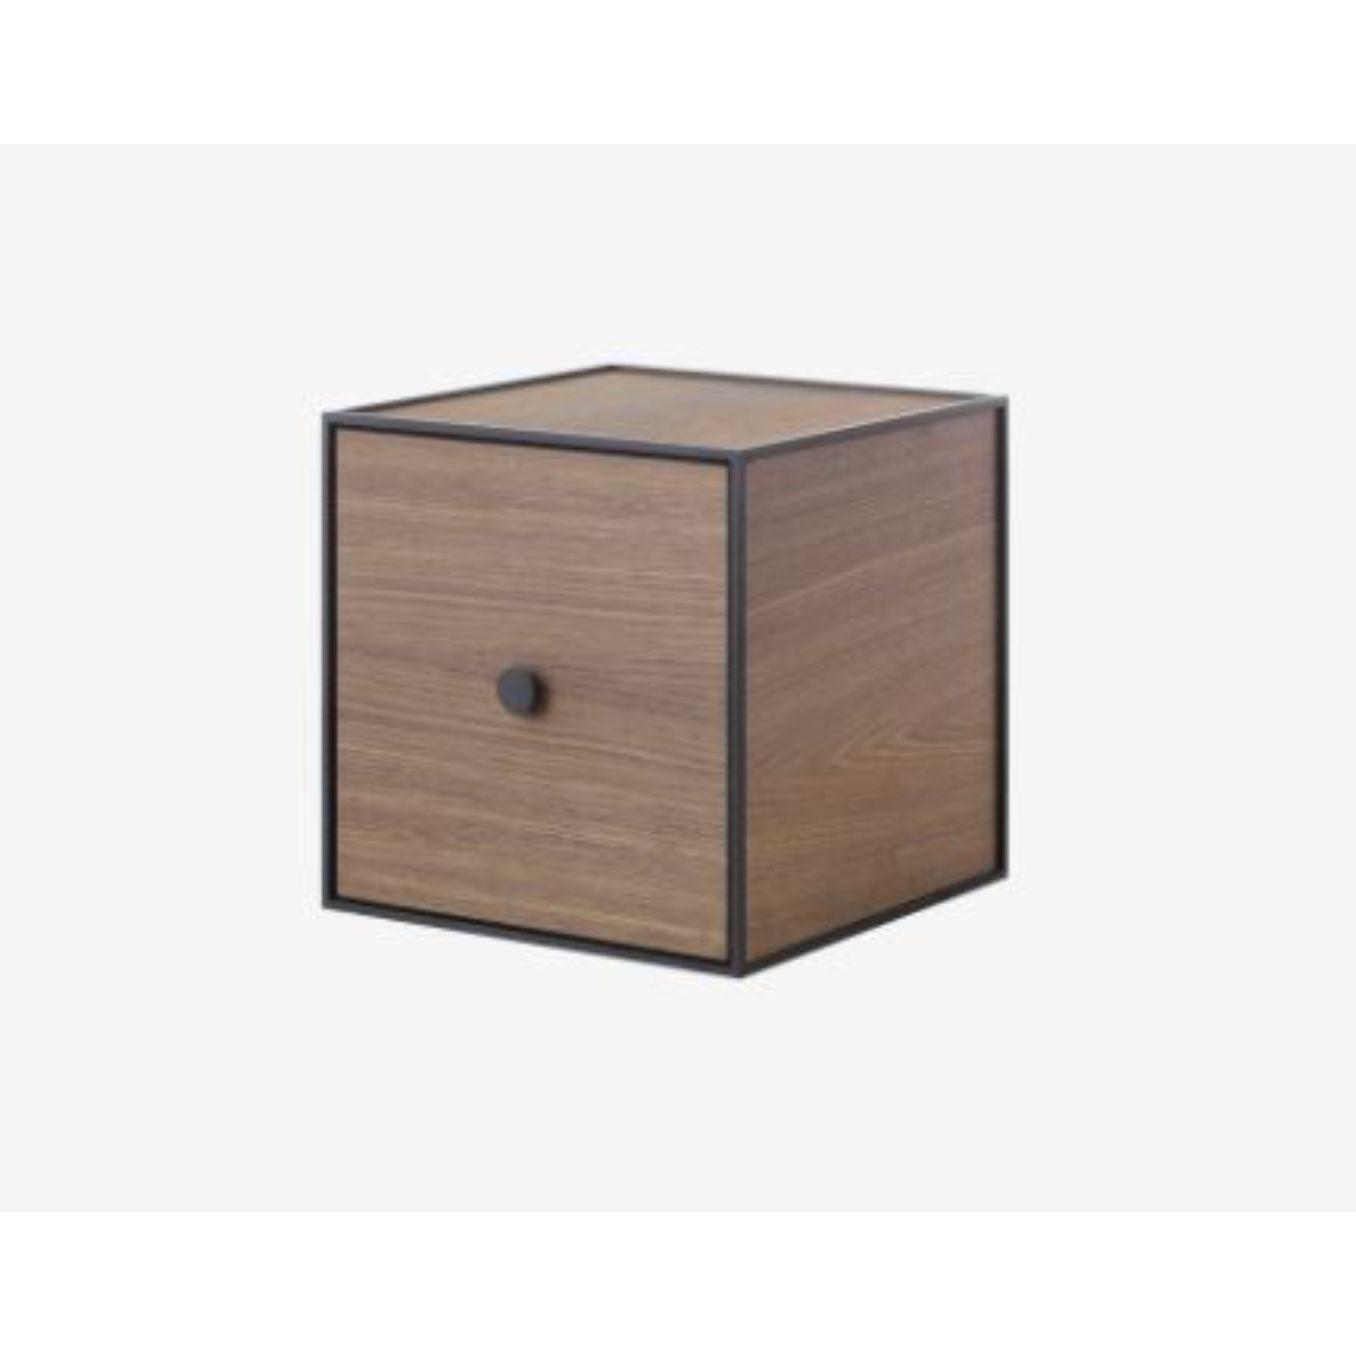 28 smoked oak frame box with door by Lassen
Dimensions: W 28 x D 28 x H 28 cm 
Materials: Finér, Melamin, Melamin, Melamine, Metal, Veneer
Also available in different colors and dimensions. 

By Lassen is a Danish design brand focused on iconic